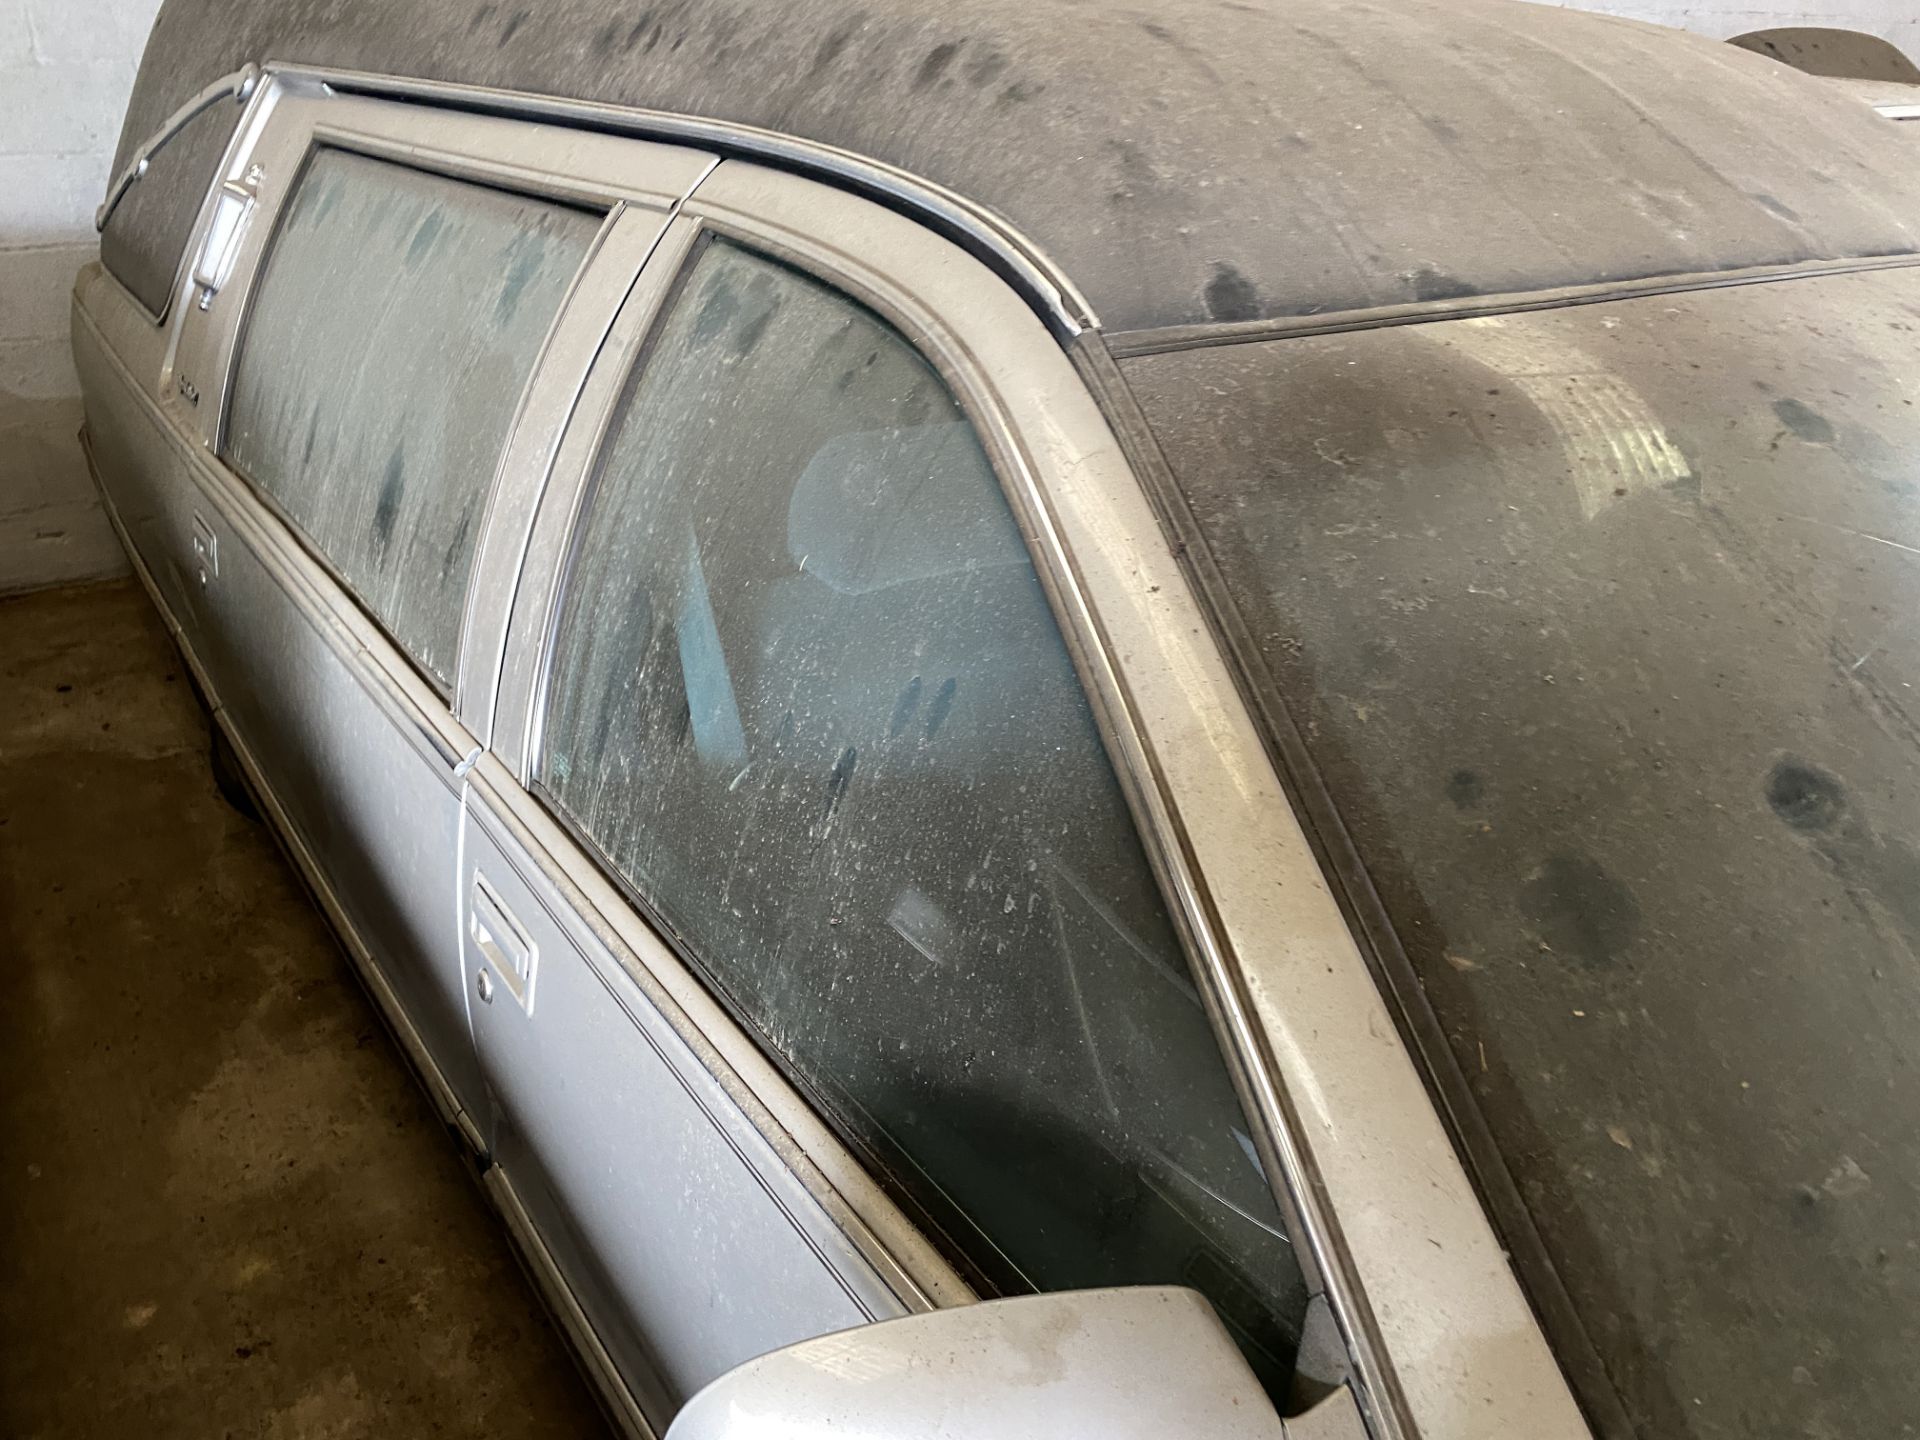 APPROX 1996 CADILLAC HEARSE IN SILVER WITH KEYS - Image 2 of 7